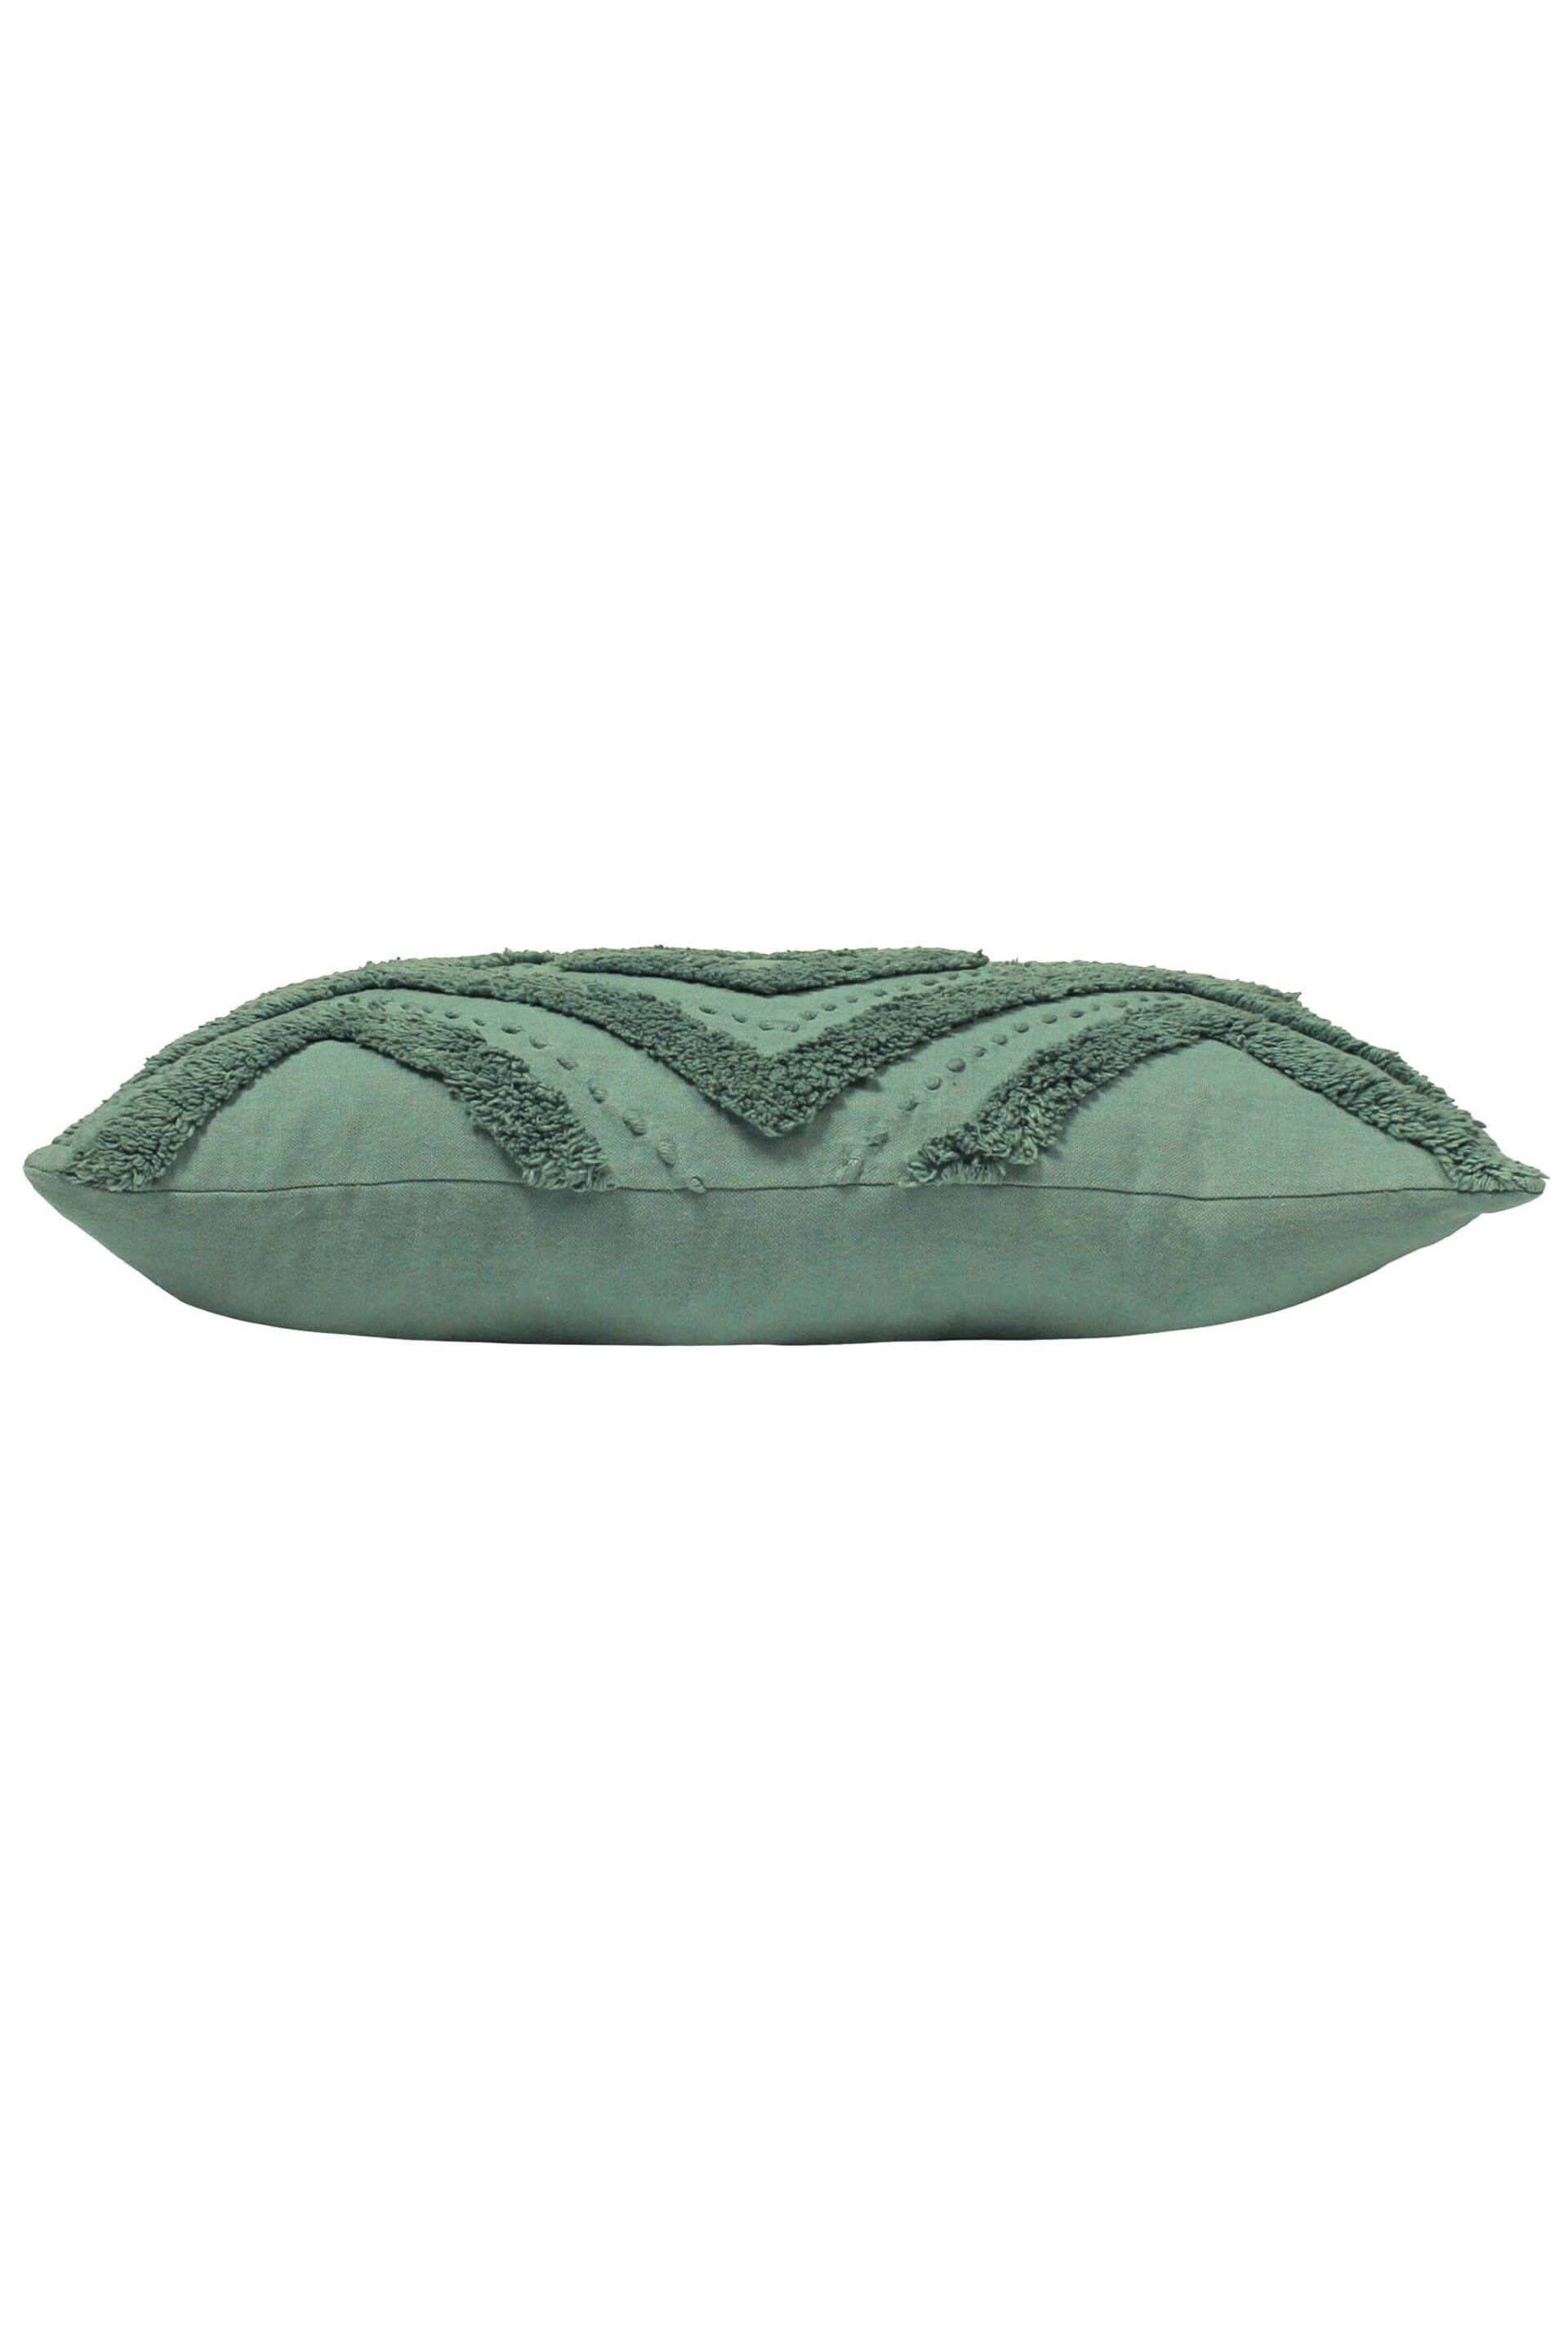 furn. Eucalyptus Green Orson Tufted Polyester Filled Cushion - Image 3 of 3